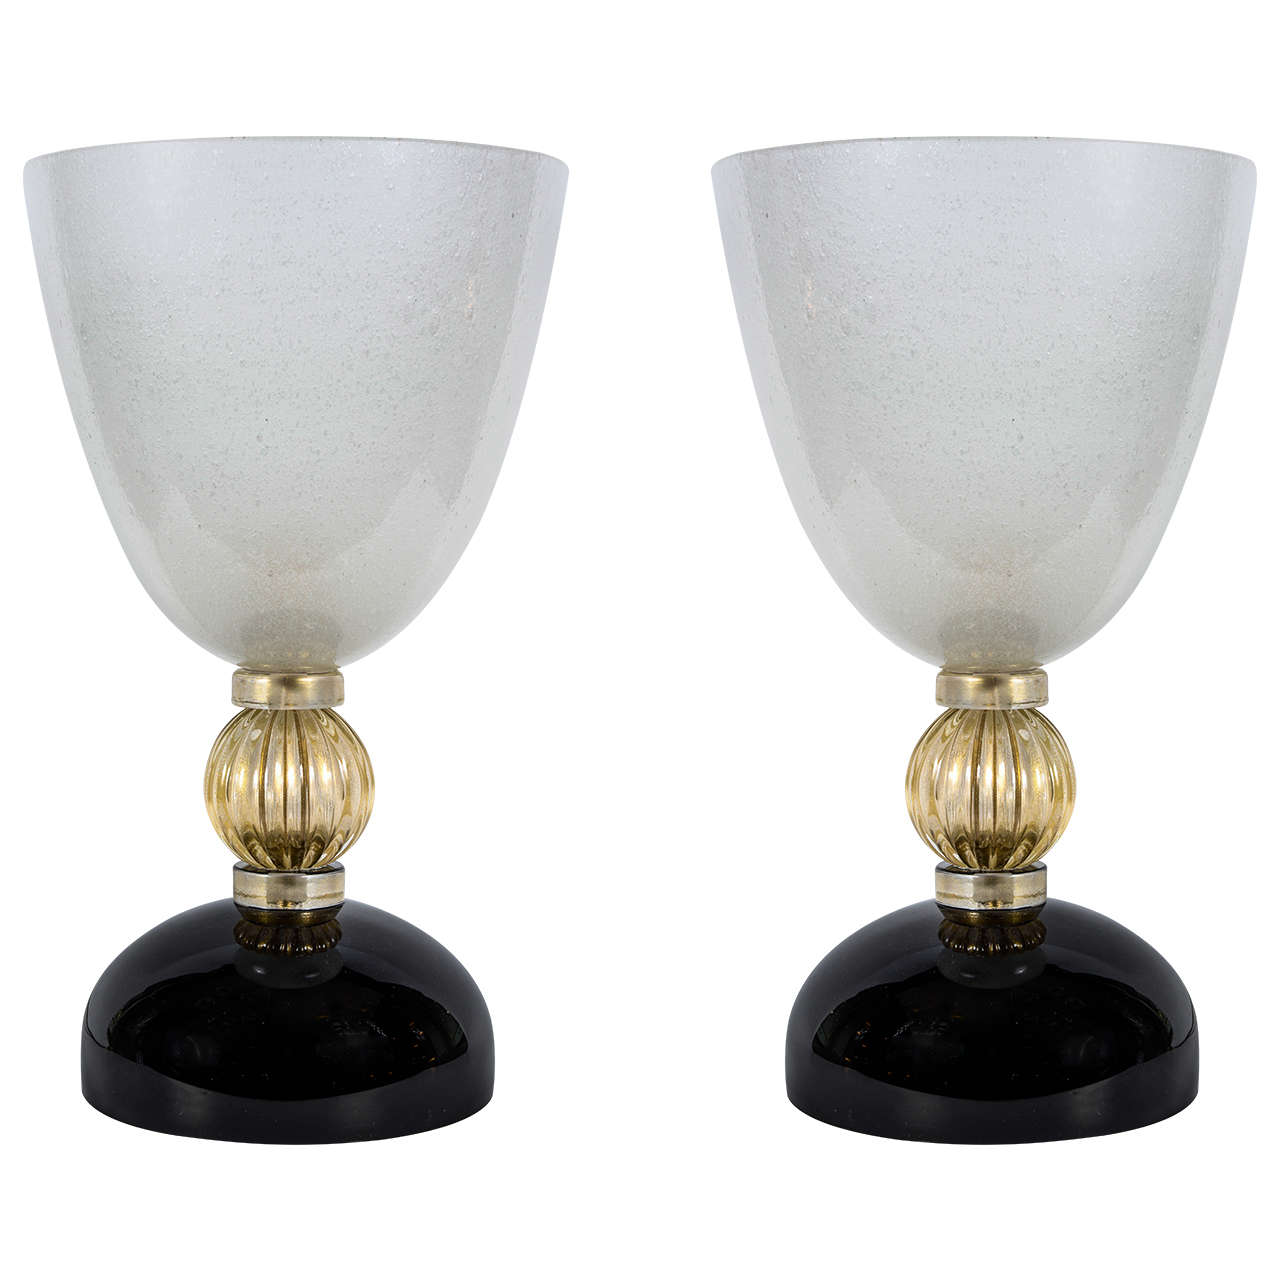 Pair of Table Lamps in Murano Glass Signed Toso 